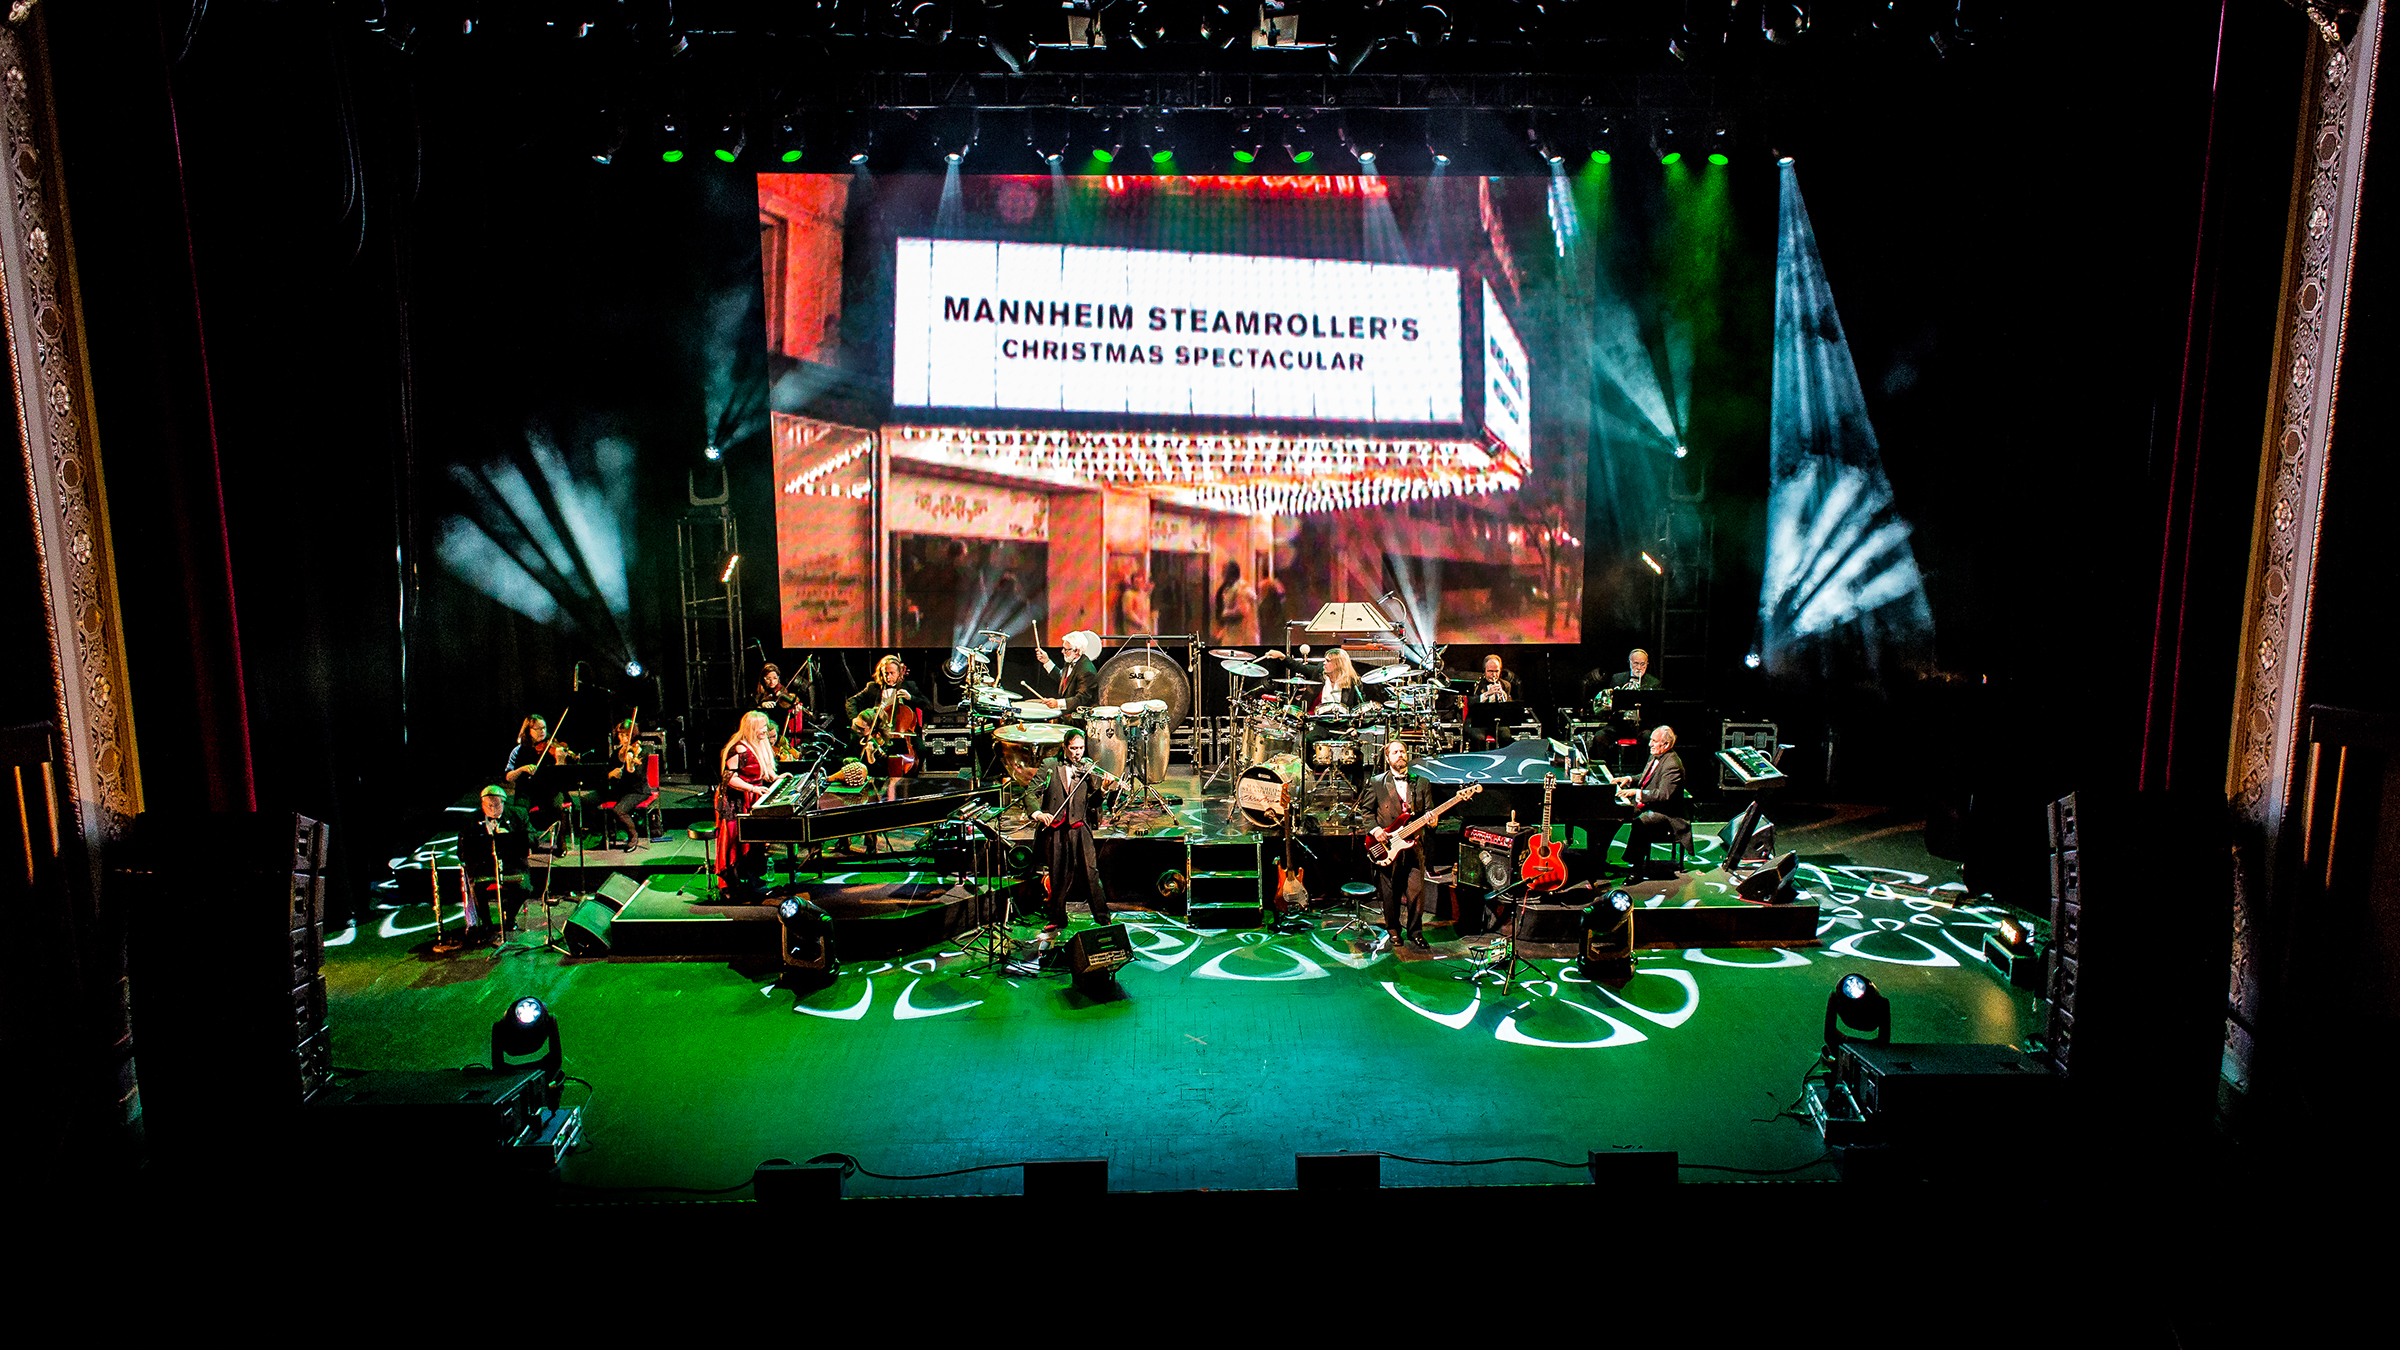 Concert stage bathed in green light with musicians and Mannheim Steamroller backdrop.